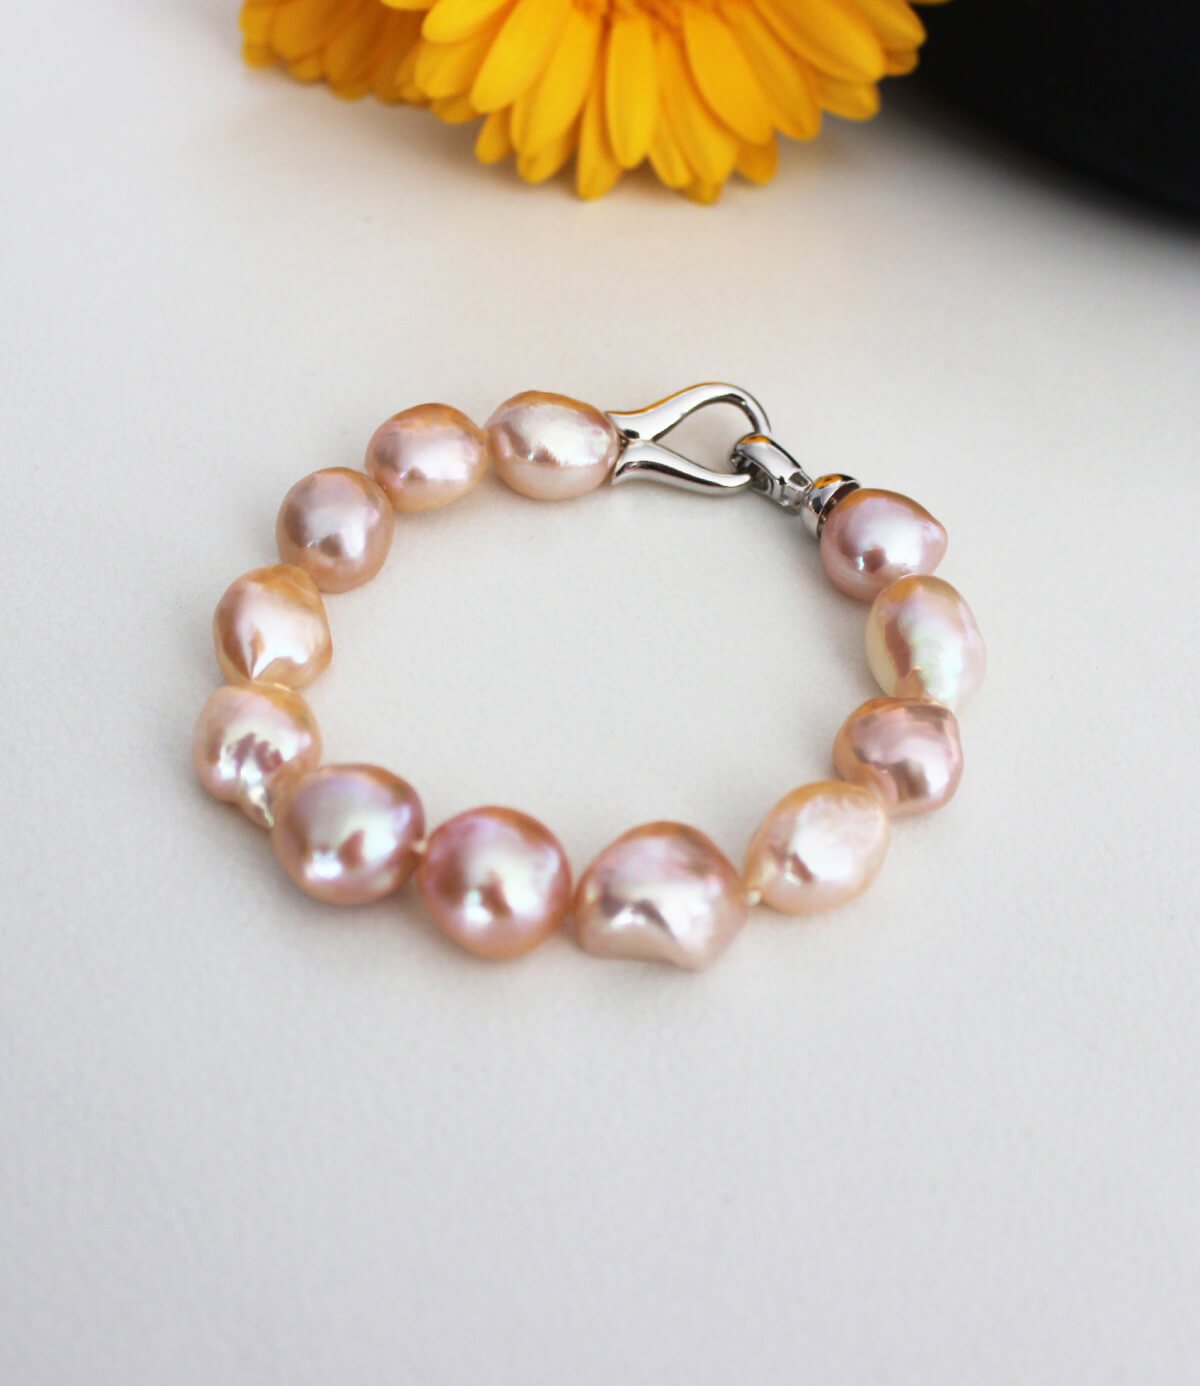 Peach Baroque Pearl Bracelet Rhodium Plated Sterling Silver Clasp